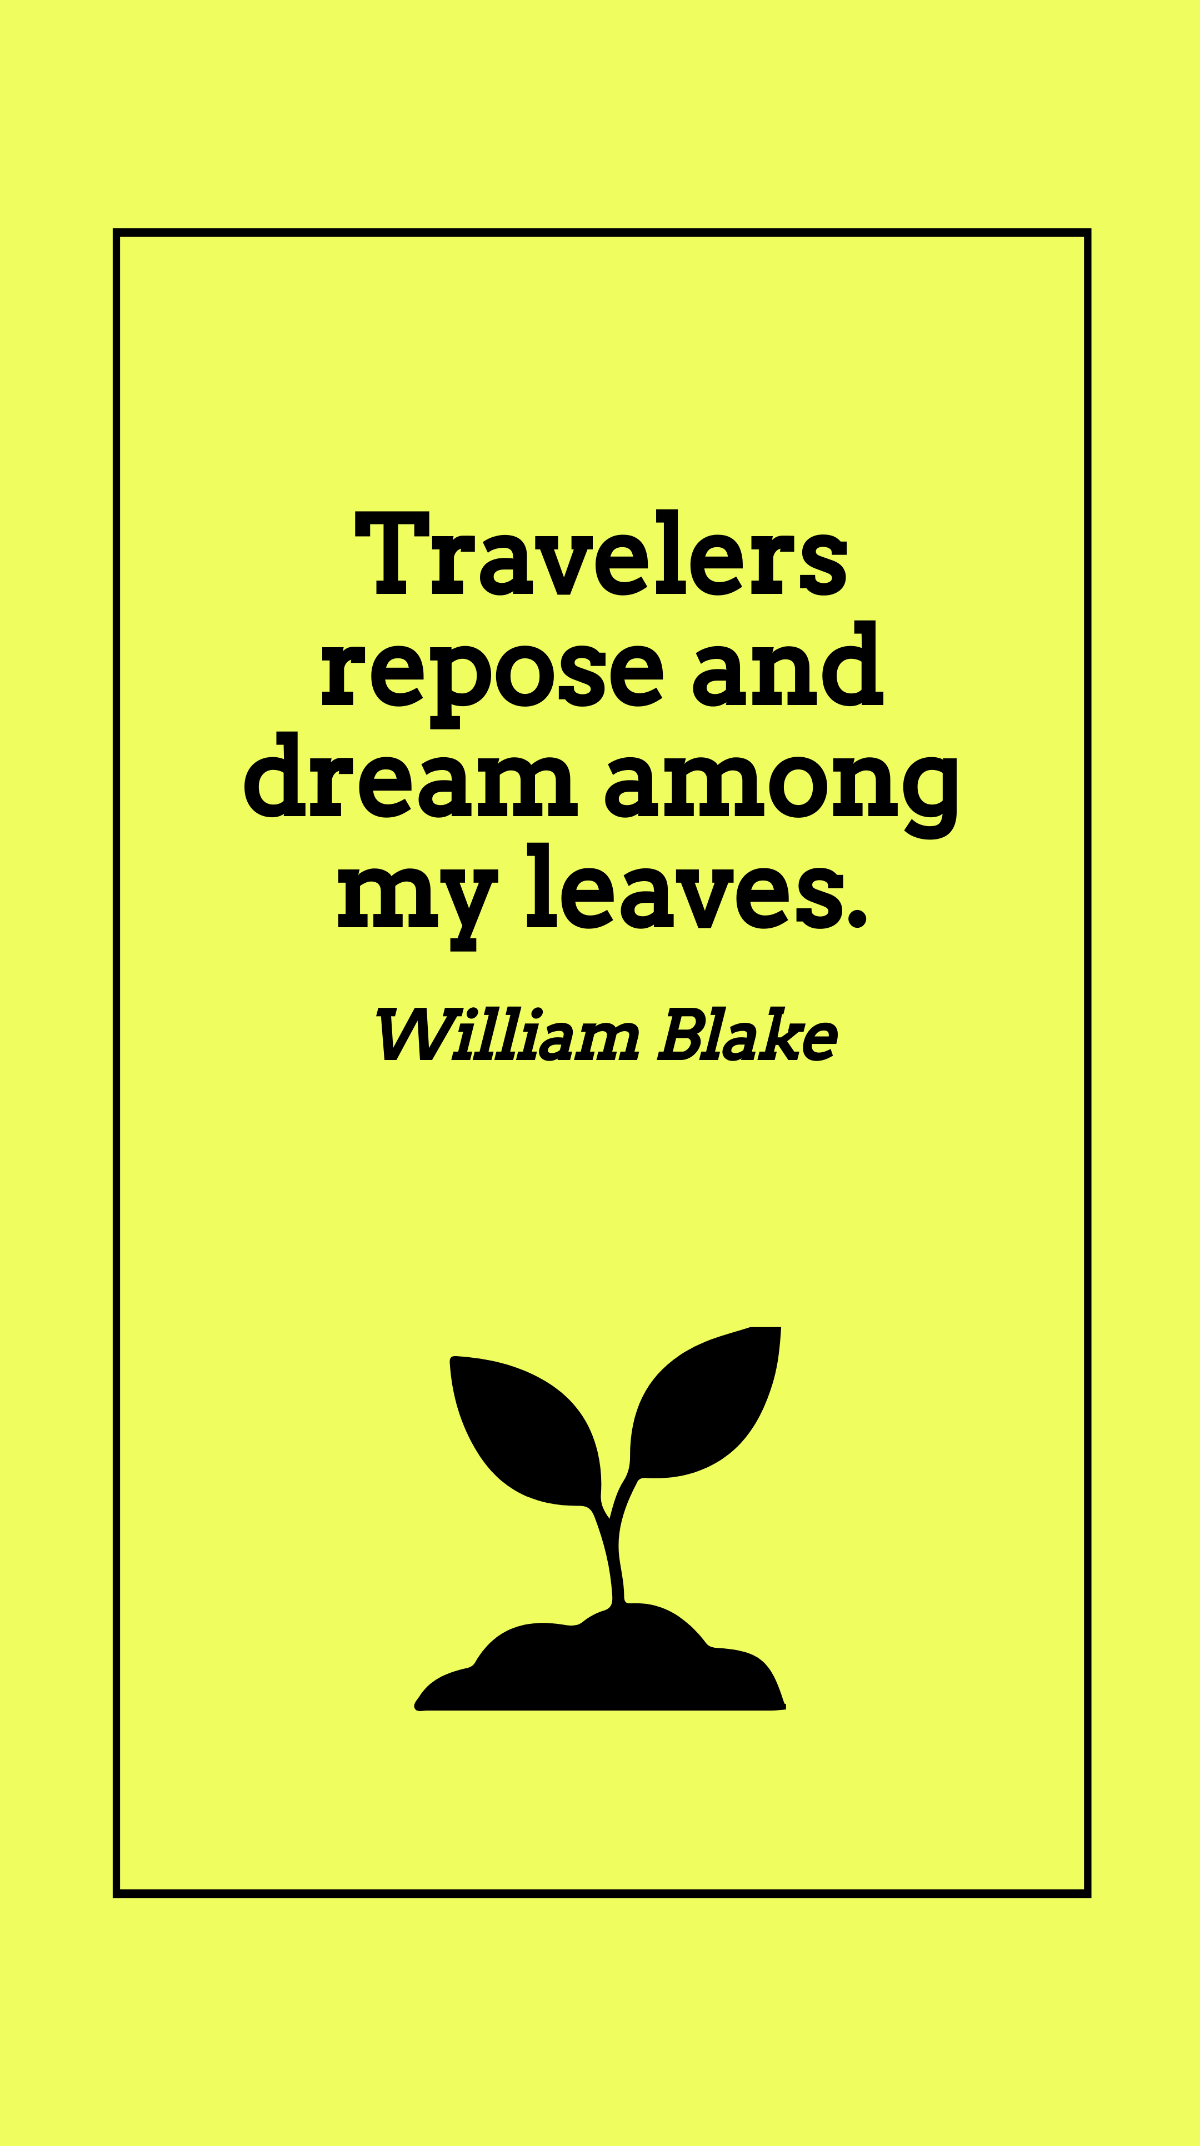 Free William Blake - Travelers repose and dream among my leaves. Template